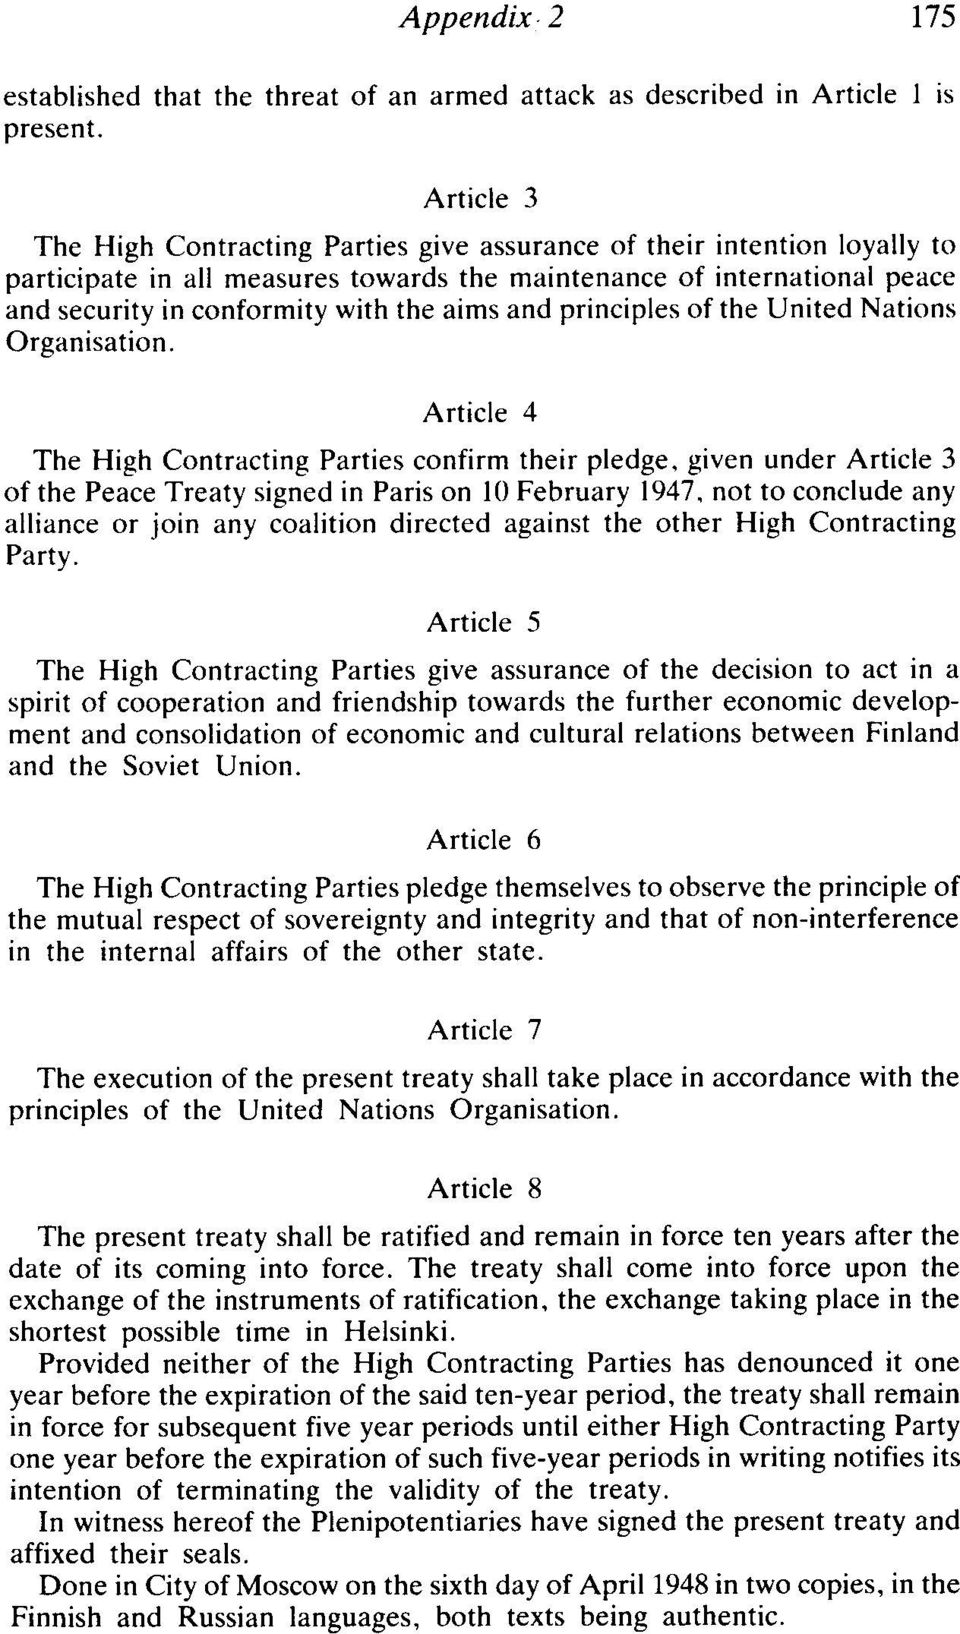 conformity with the aims and pr inciple s of the United Nati ons Organ isation. Article 4 Th e High Contracting Parti es confirm their pledge.